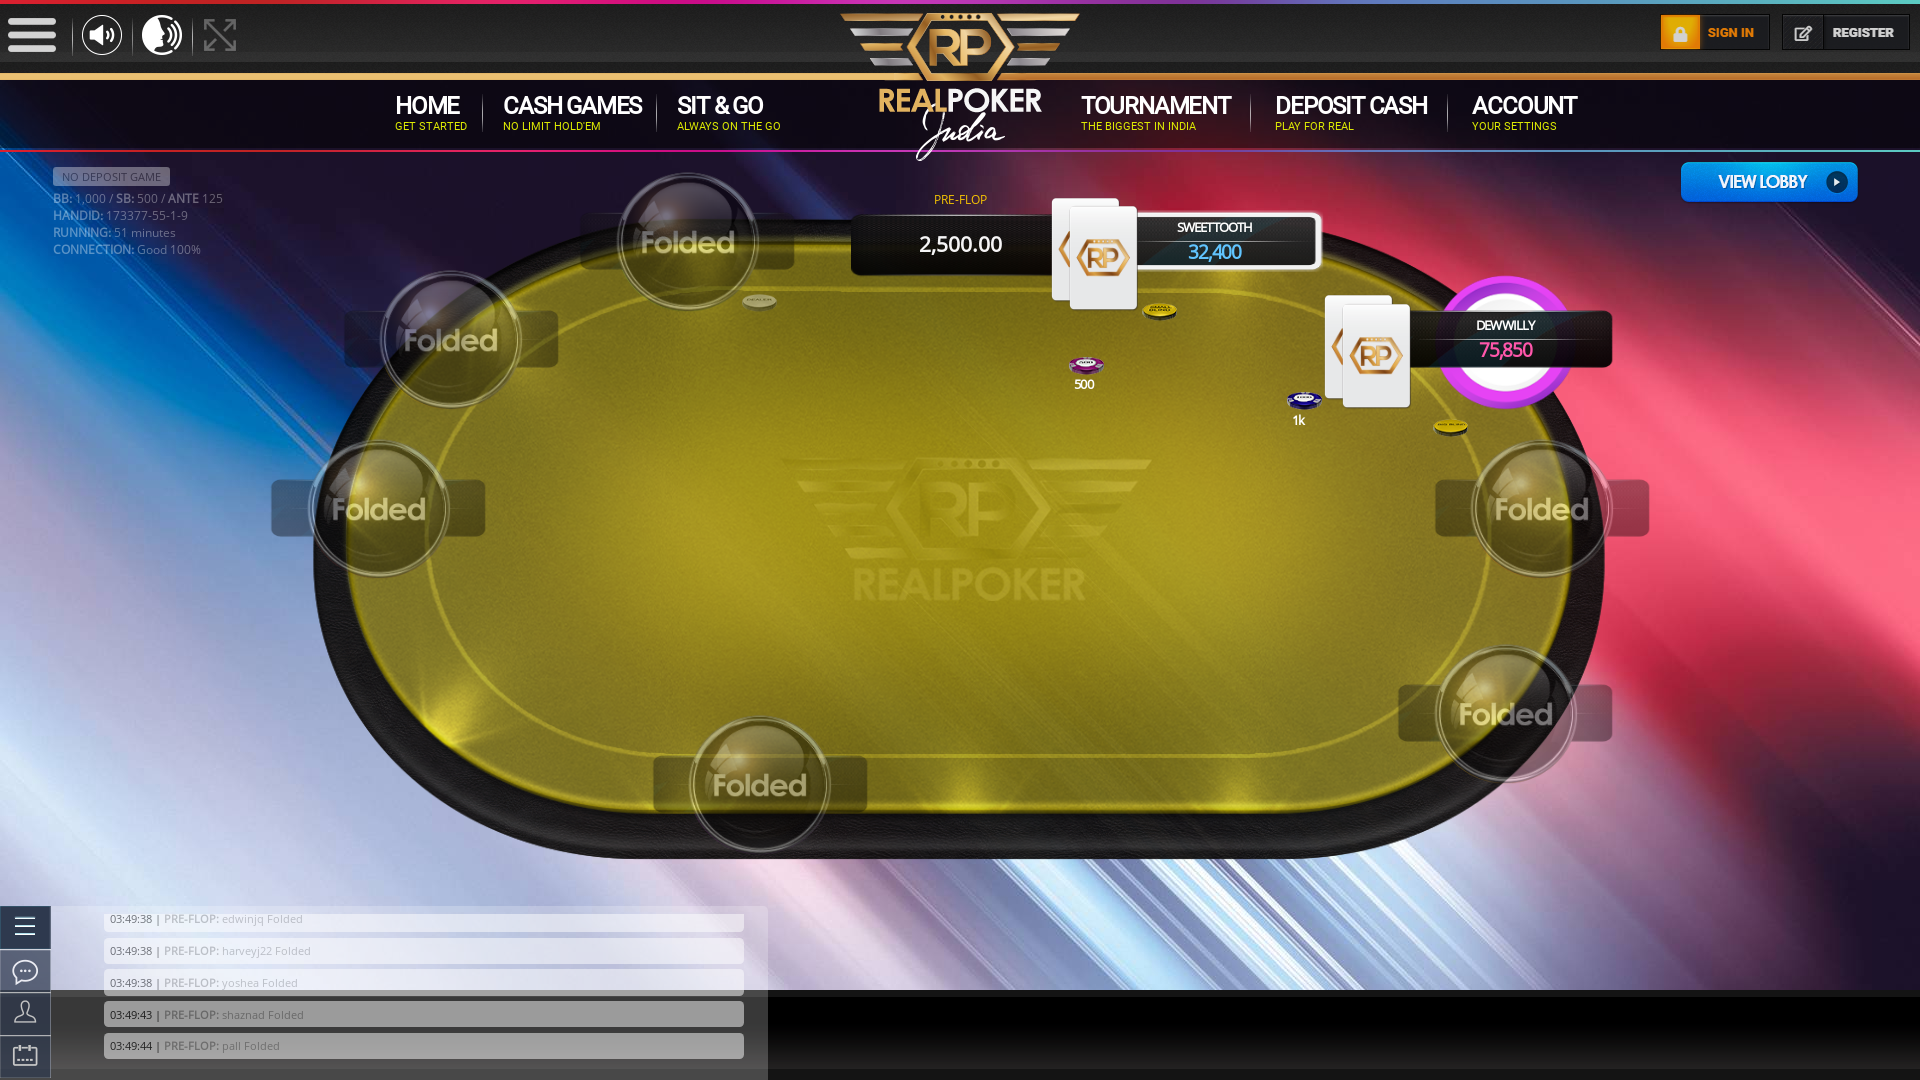 Online poker on a 10 player table in the 51st minute match up